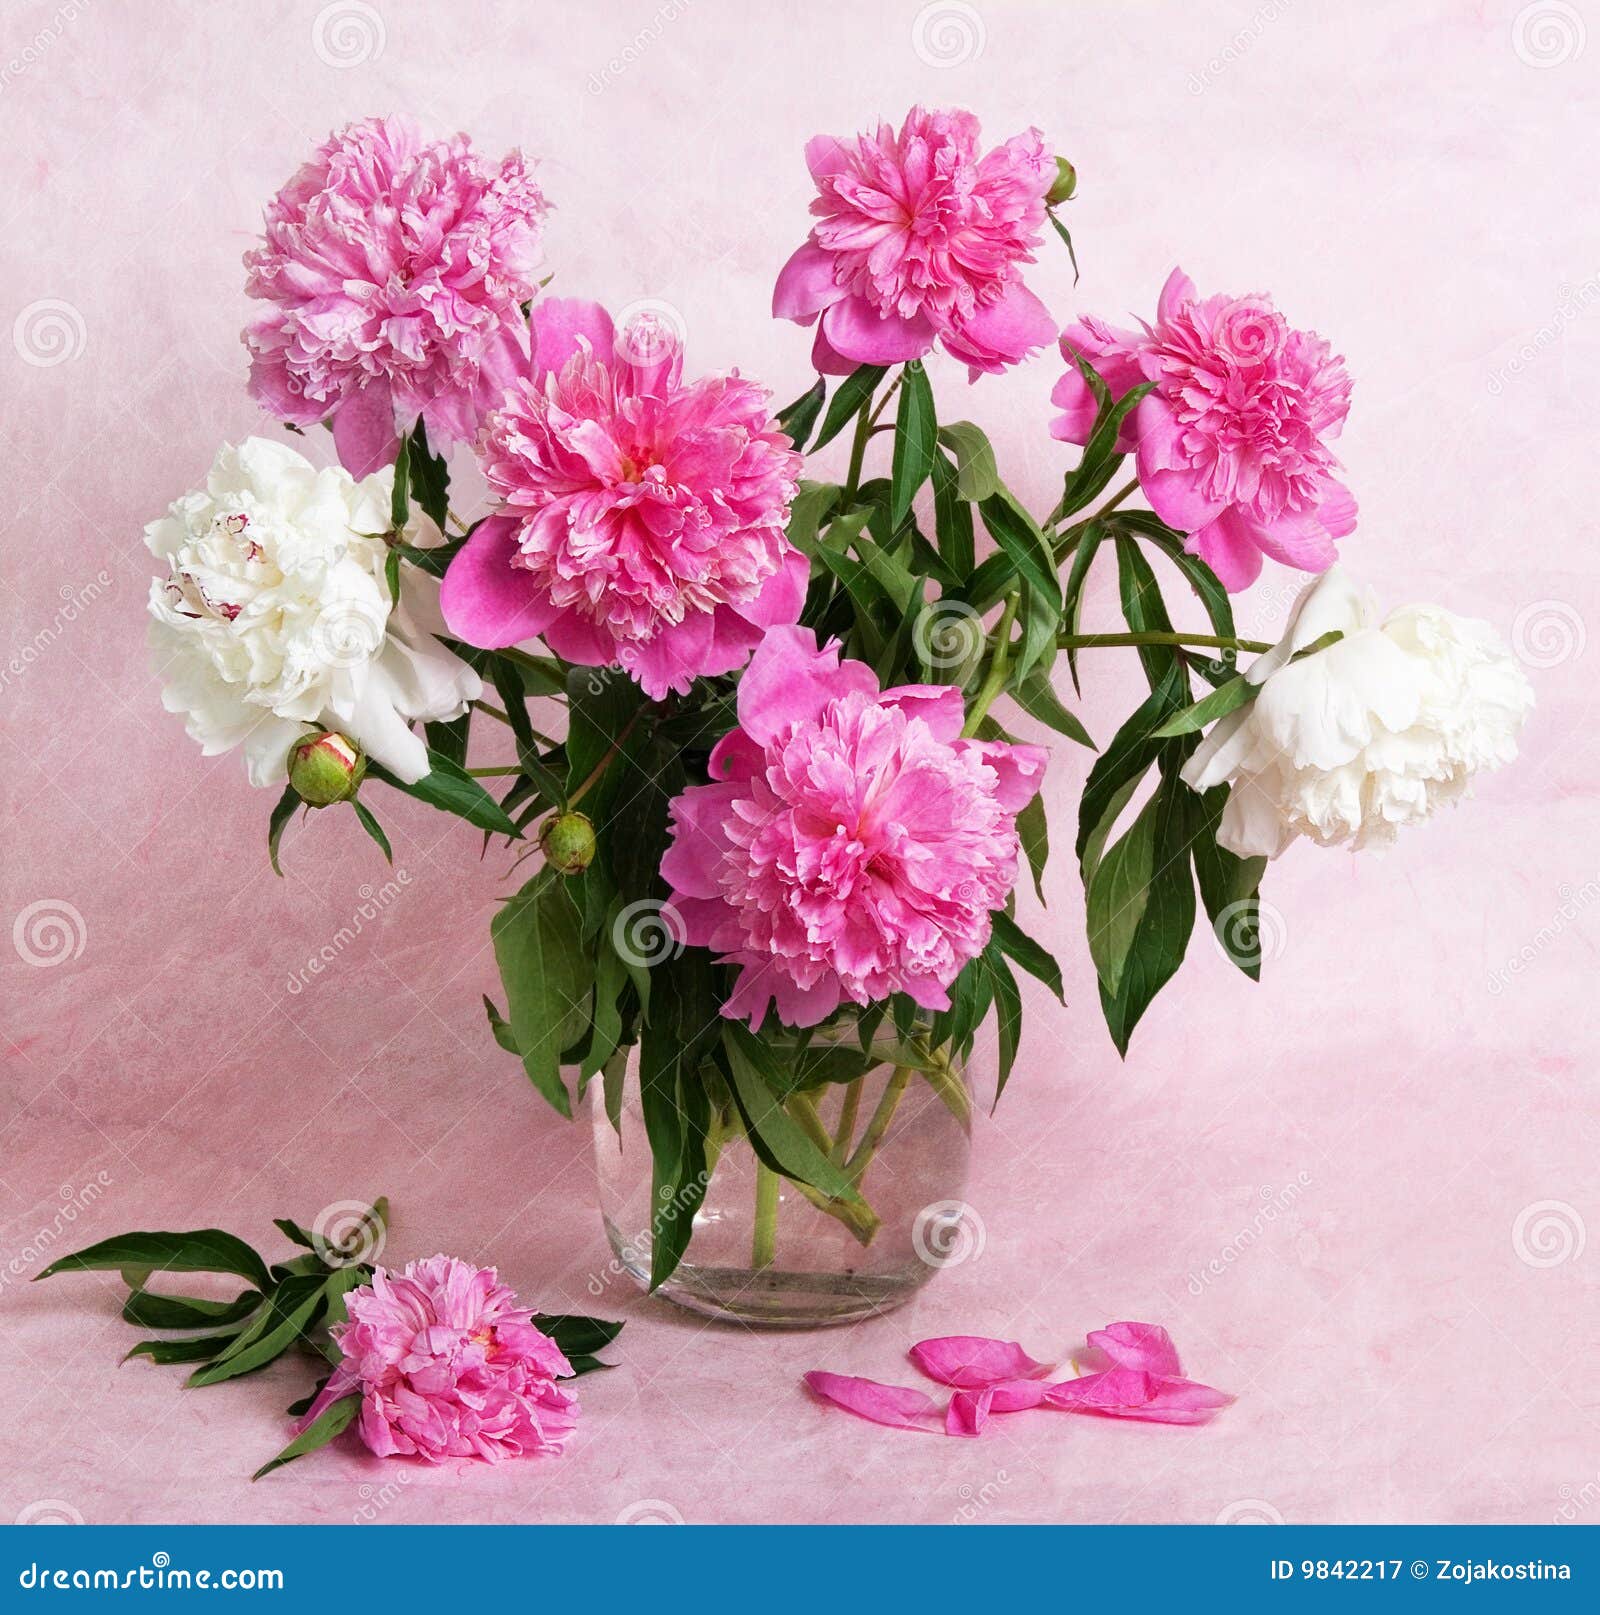 Beautiful Peonies in a Glass Vase Stock Image - Image of ornamental ...